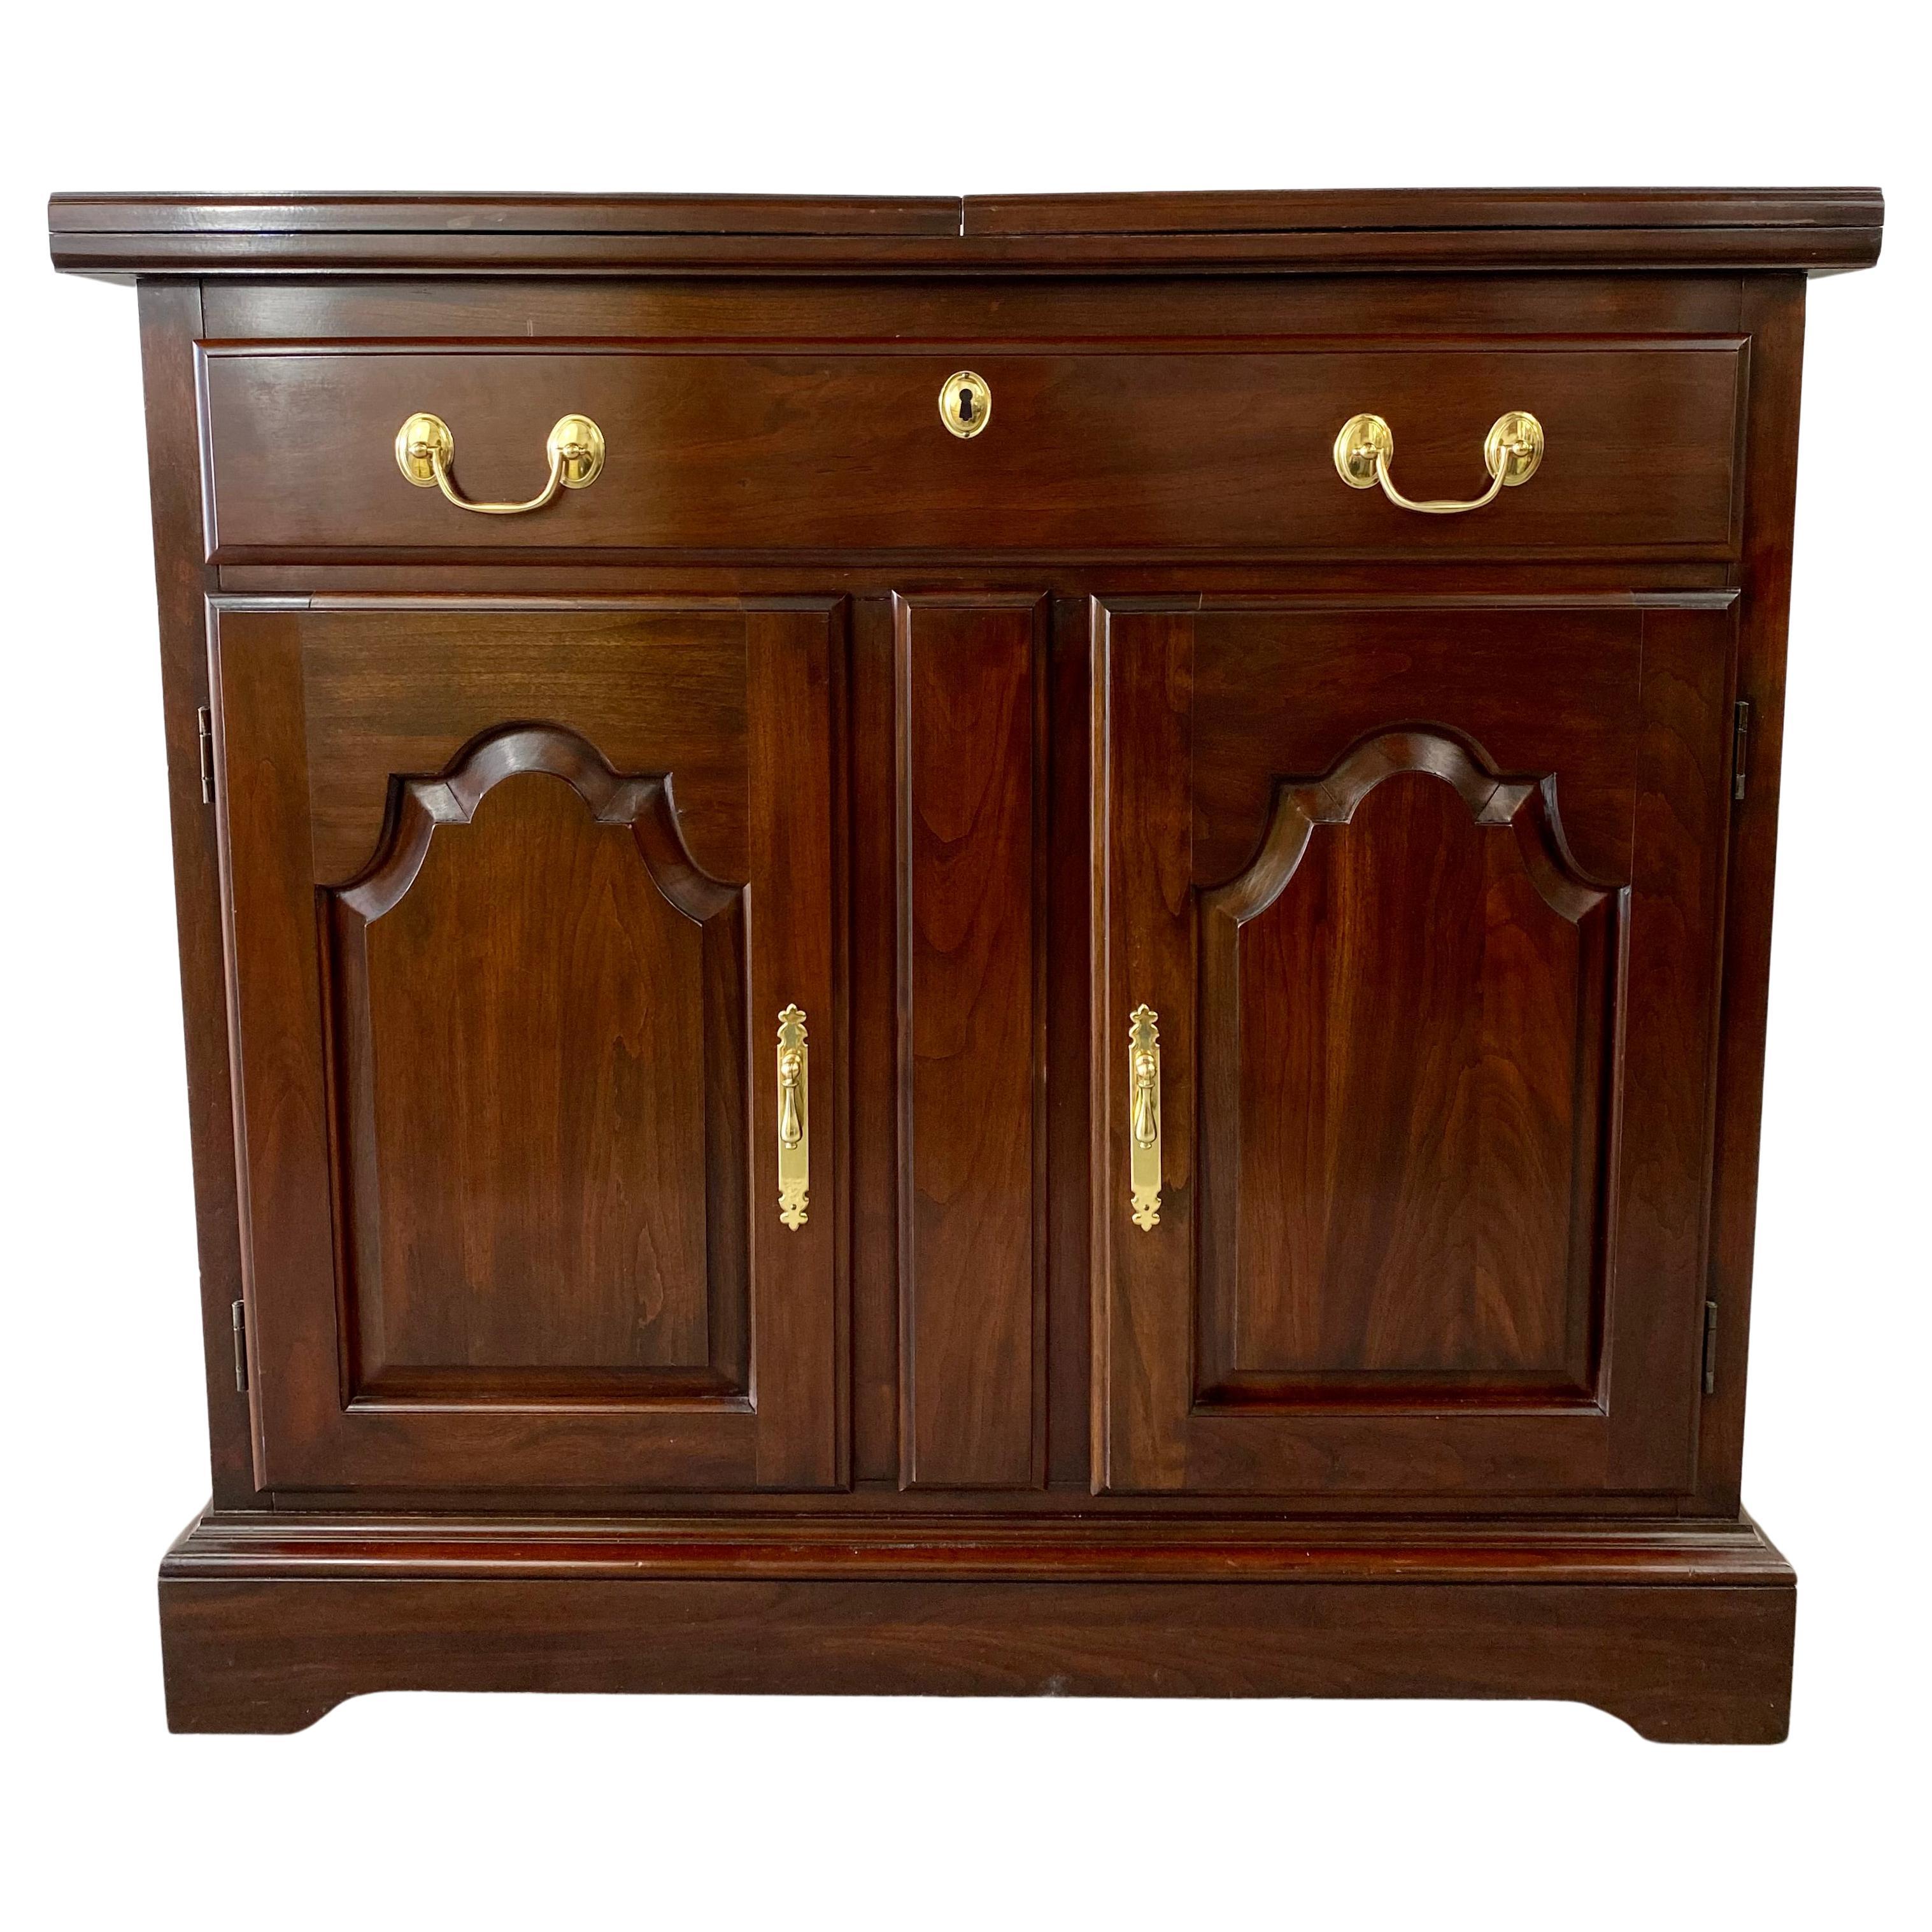 Chippendale Style Cherry Wood Folding Cabinet or Serving Bar by Harden  For Sale